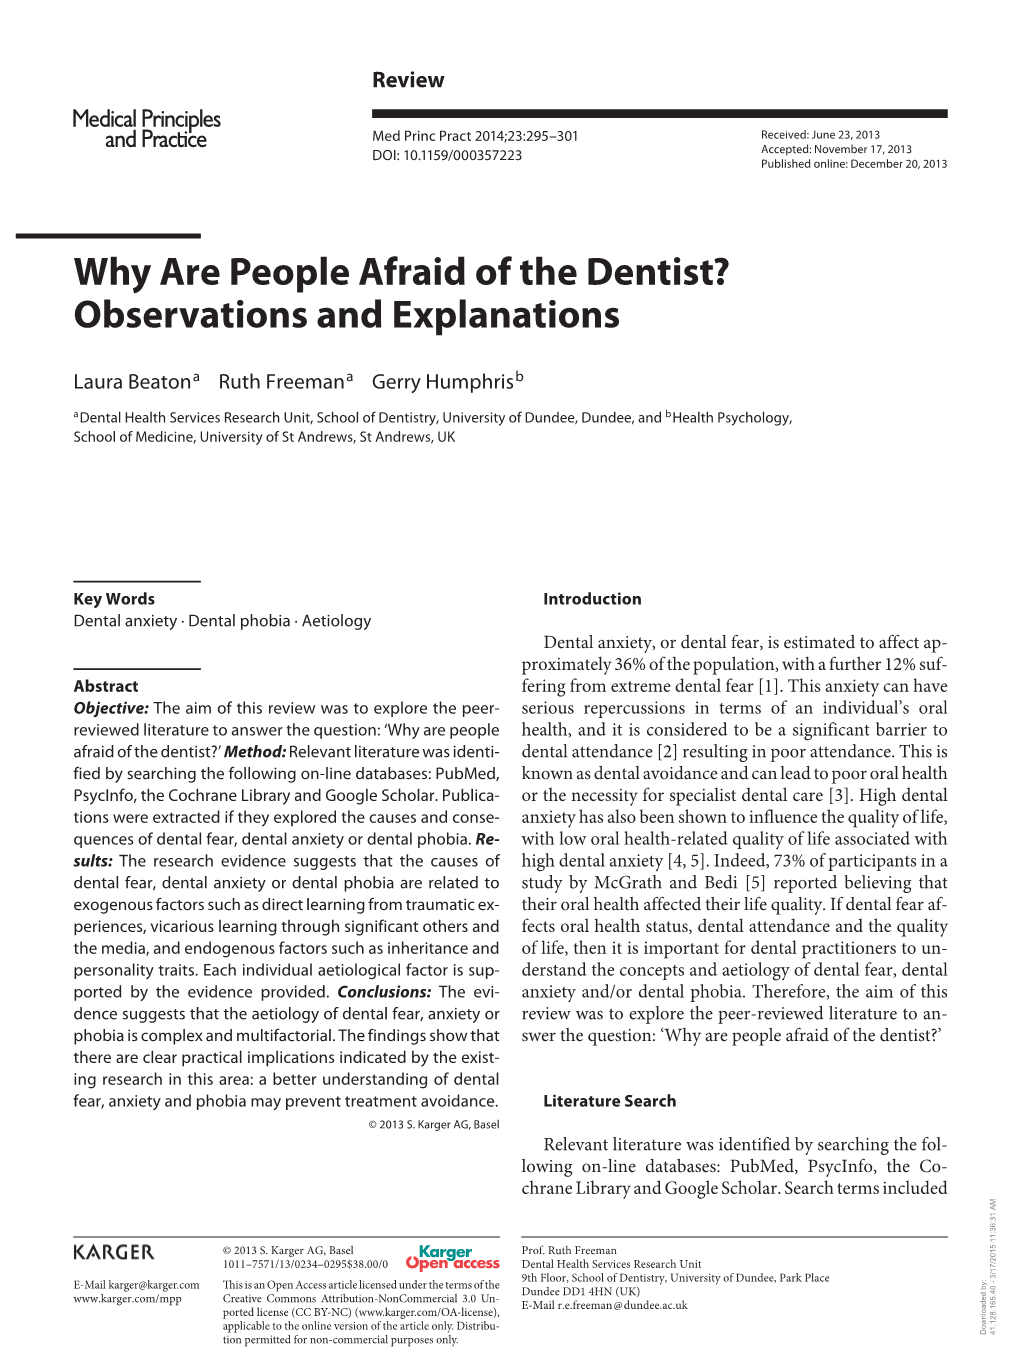 Why Are People Afraid of the Dentist? Observations and Explanations